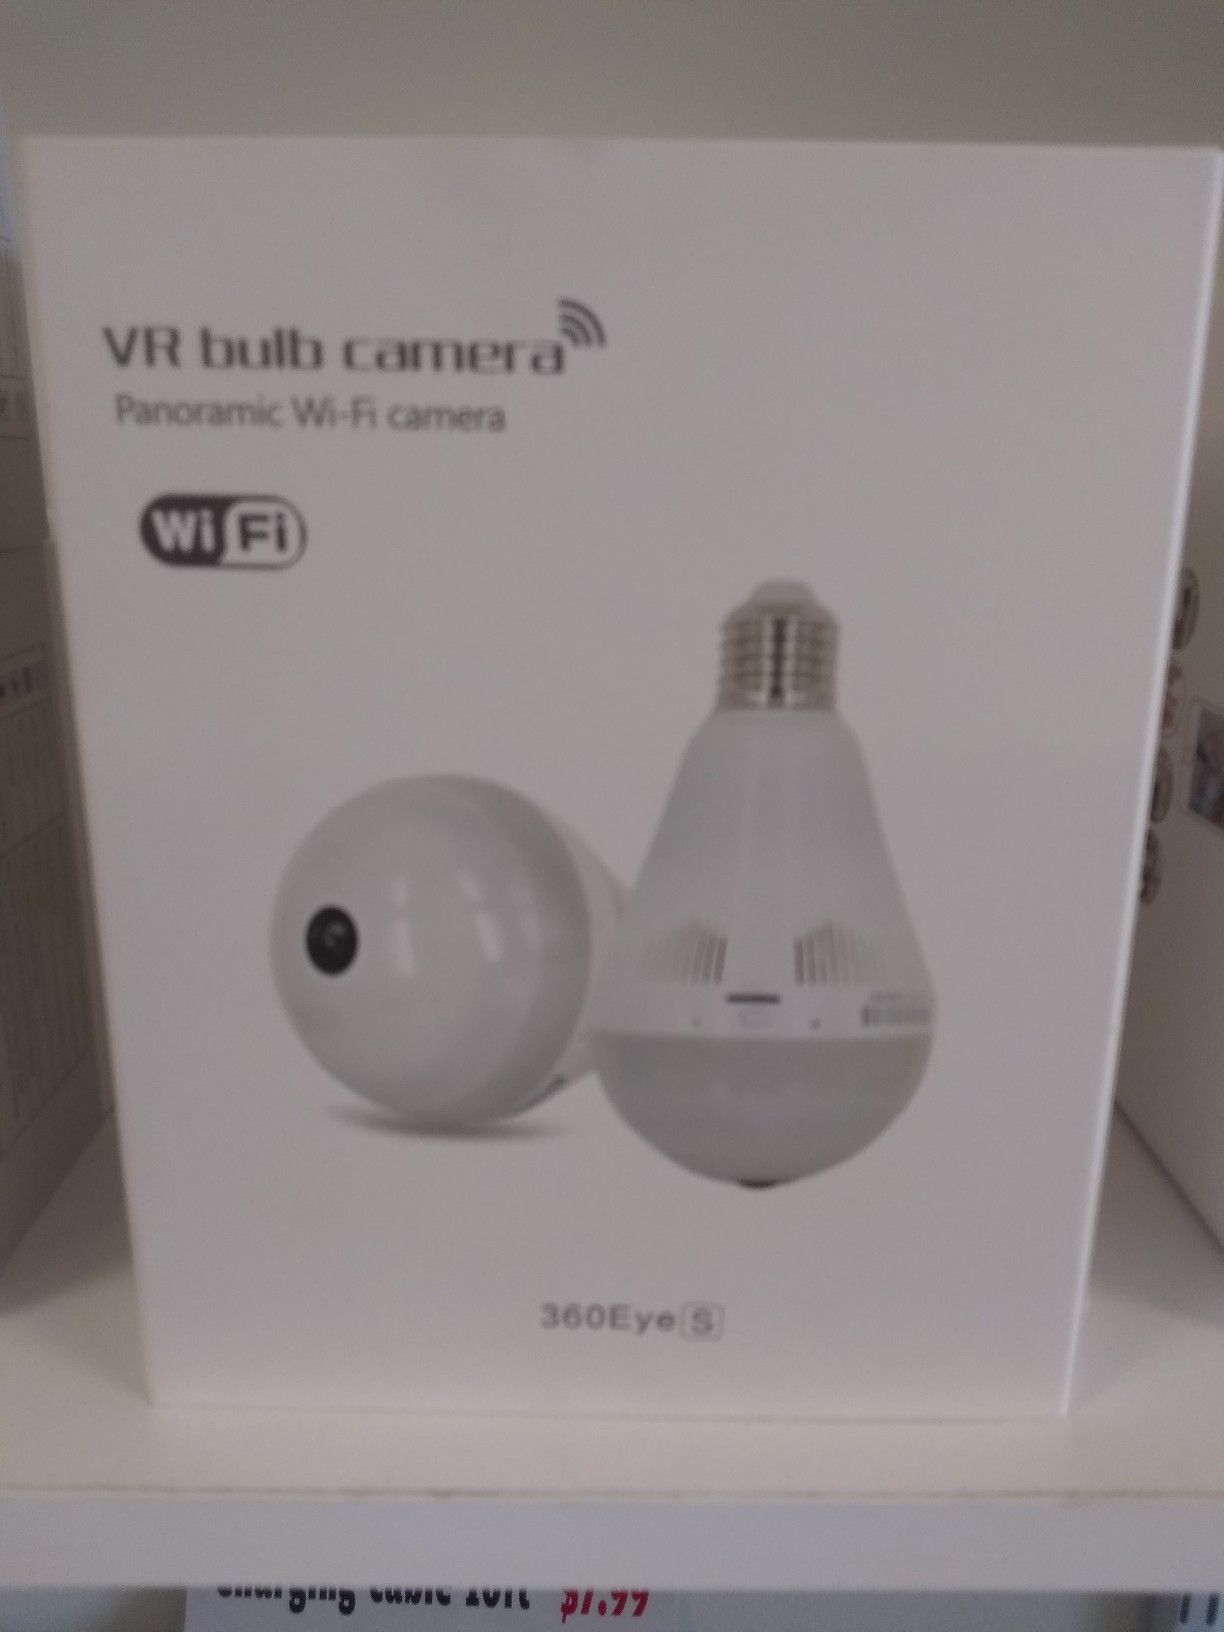 Light bulb WiFi home security camera motion detection sound detection night vision and talk back